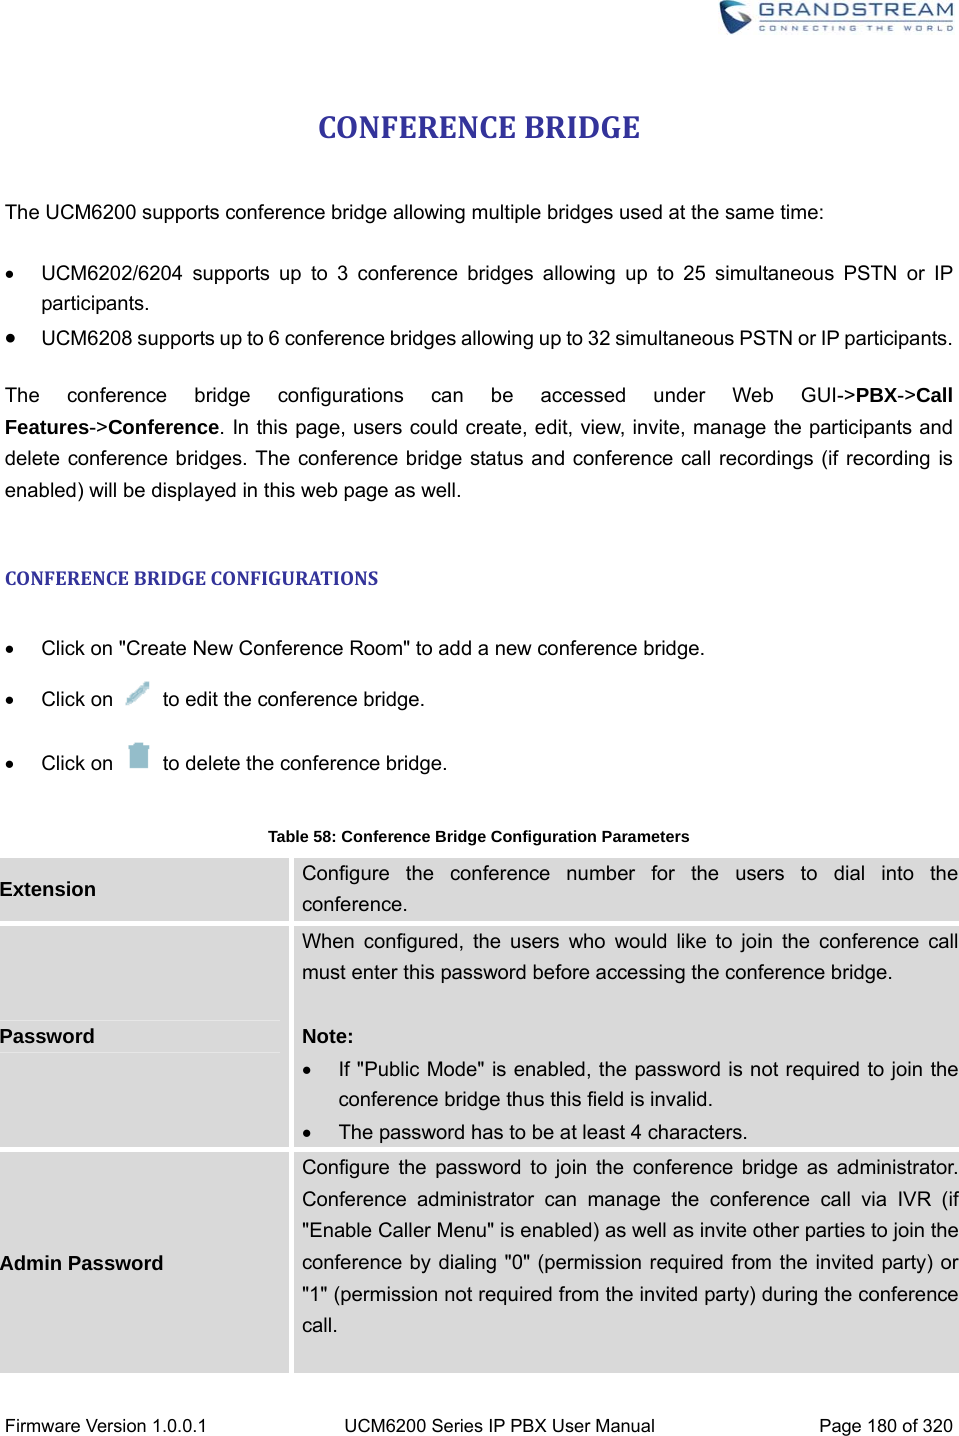  Firmware Version 1.0.0.1  UCM6200 Series IP PBX User Manual  Page 180 of 320 CONFERENCEBRIDGE The UCM6200 supports conference bridge allowing multiple bridges used at the same time:   UCM6202/6204 supports up to 3 conference bridges allowing up to 25 simultaneous PSTN or IP participants.  UCM6208 supports up to 6 conference bridges allowing up to 32 simultaneous PSTN or IP participants. The conference bridge configurations can be accessed under Web GUI-&gt;PBX-&gt;Call Features-&gt;Conference. In this page, users could create, edit, view, invite, manage the participants and delete conference bridges. The conference bridge status and conference call recordings (if recording is enabled) will be displayed in this web page as well.  CONFERENCEBRIDGECONFIGURATIONS   Click on &quot;Create New Conference Room&quot; to add a new conference bridge.  Click on    to edit the conference bridge.  Click on    to delete the conference bridge.    Table 58: Conference Bridge Configuration Parameters Extension  Configure the conference number for the users to dial into the conference. Password When configured, the users who would like to join the conference call must enter this password before accessing the conference bridge.  Note:   If &quot;Public Mode&quot; is enabled, the password is not required to join the conference bridge thus this field is invalid.   The password has to be at least 4 characters. Admin Password Configure the password to join the conference bridge as administrator. Conference administrator can manage the conference call via IVR (if &quot;Enable Caller Menu&quot; is enabled) as well as invite other parties to join the conference by dialing &quot;0&quot; (permission required from the invited party) or &quot;1&quot; (permission not required from the invited party) during the conference call.  